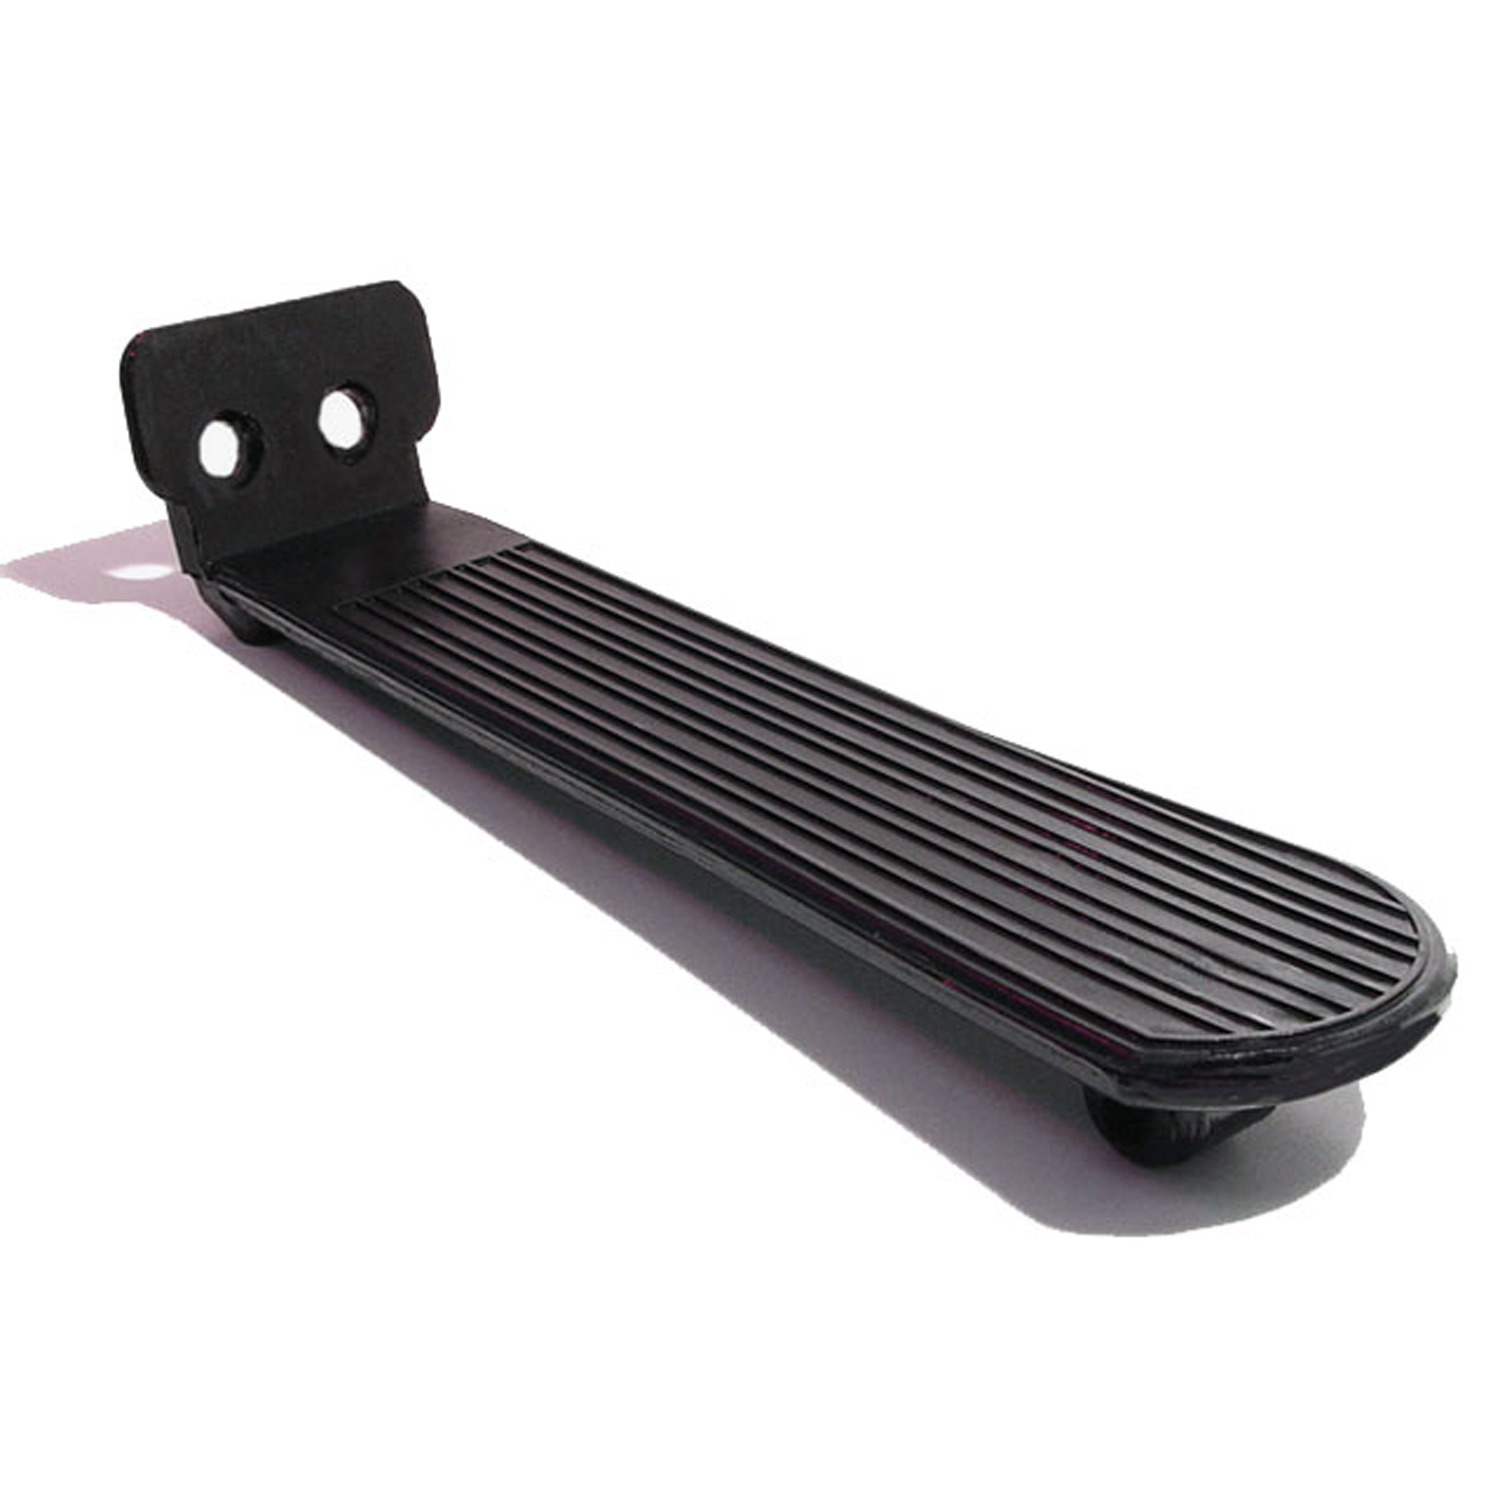 1949 Buick Super Series 50 Accelerator Pedal Pad.  Made with steel core like original-AP 29-C